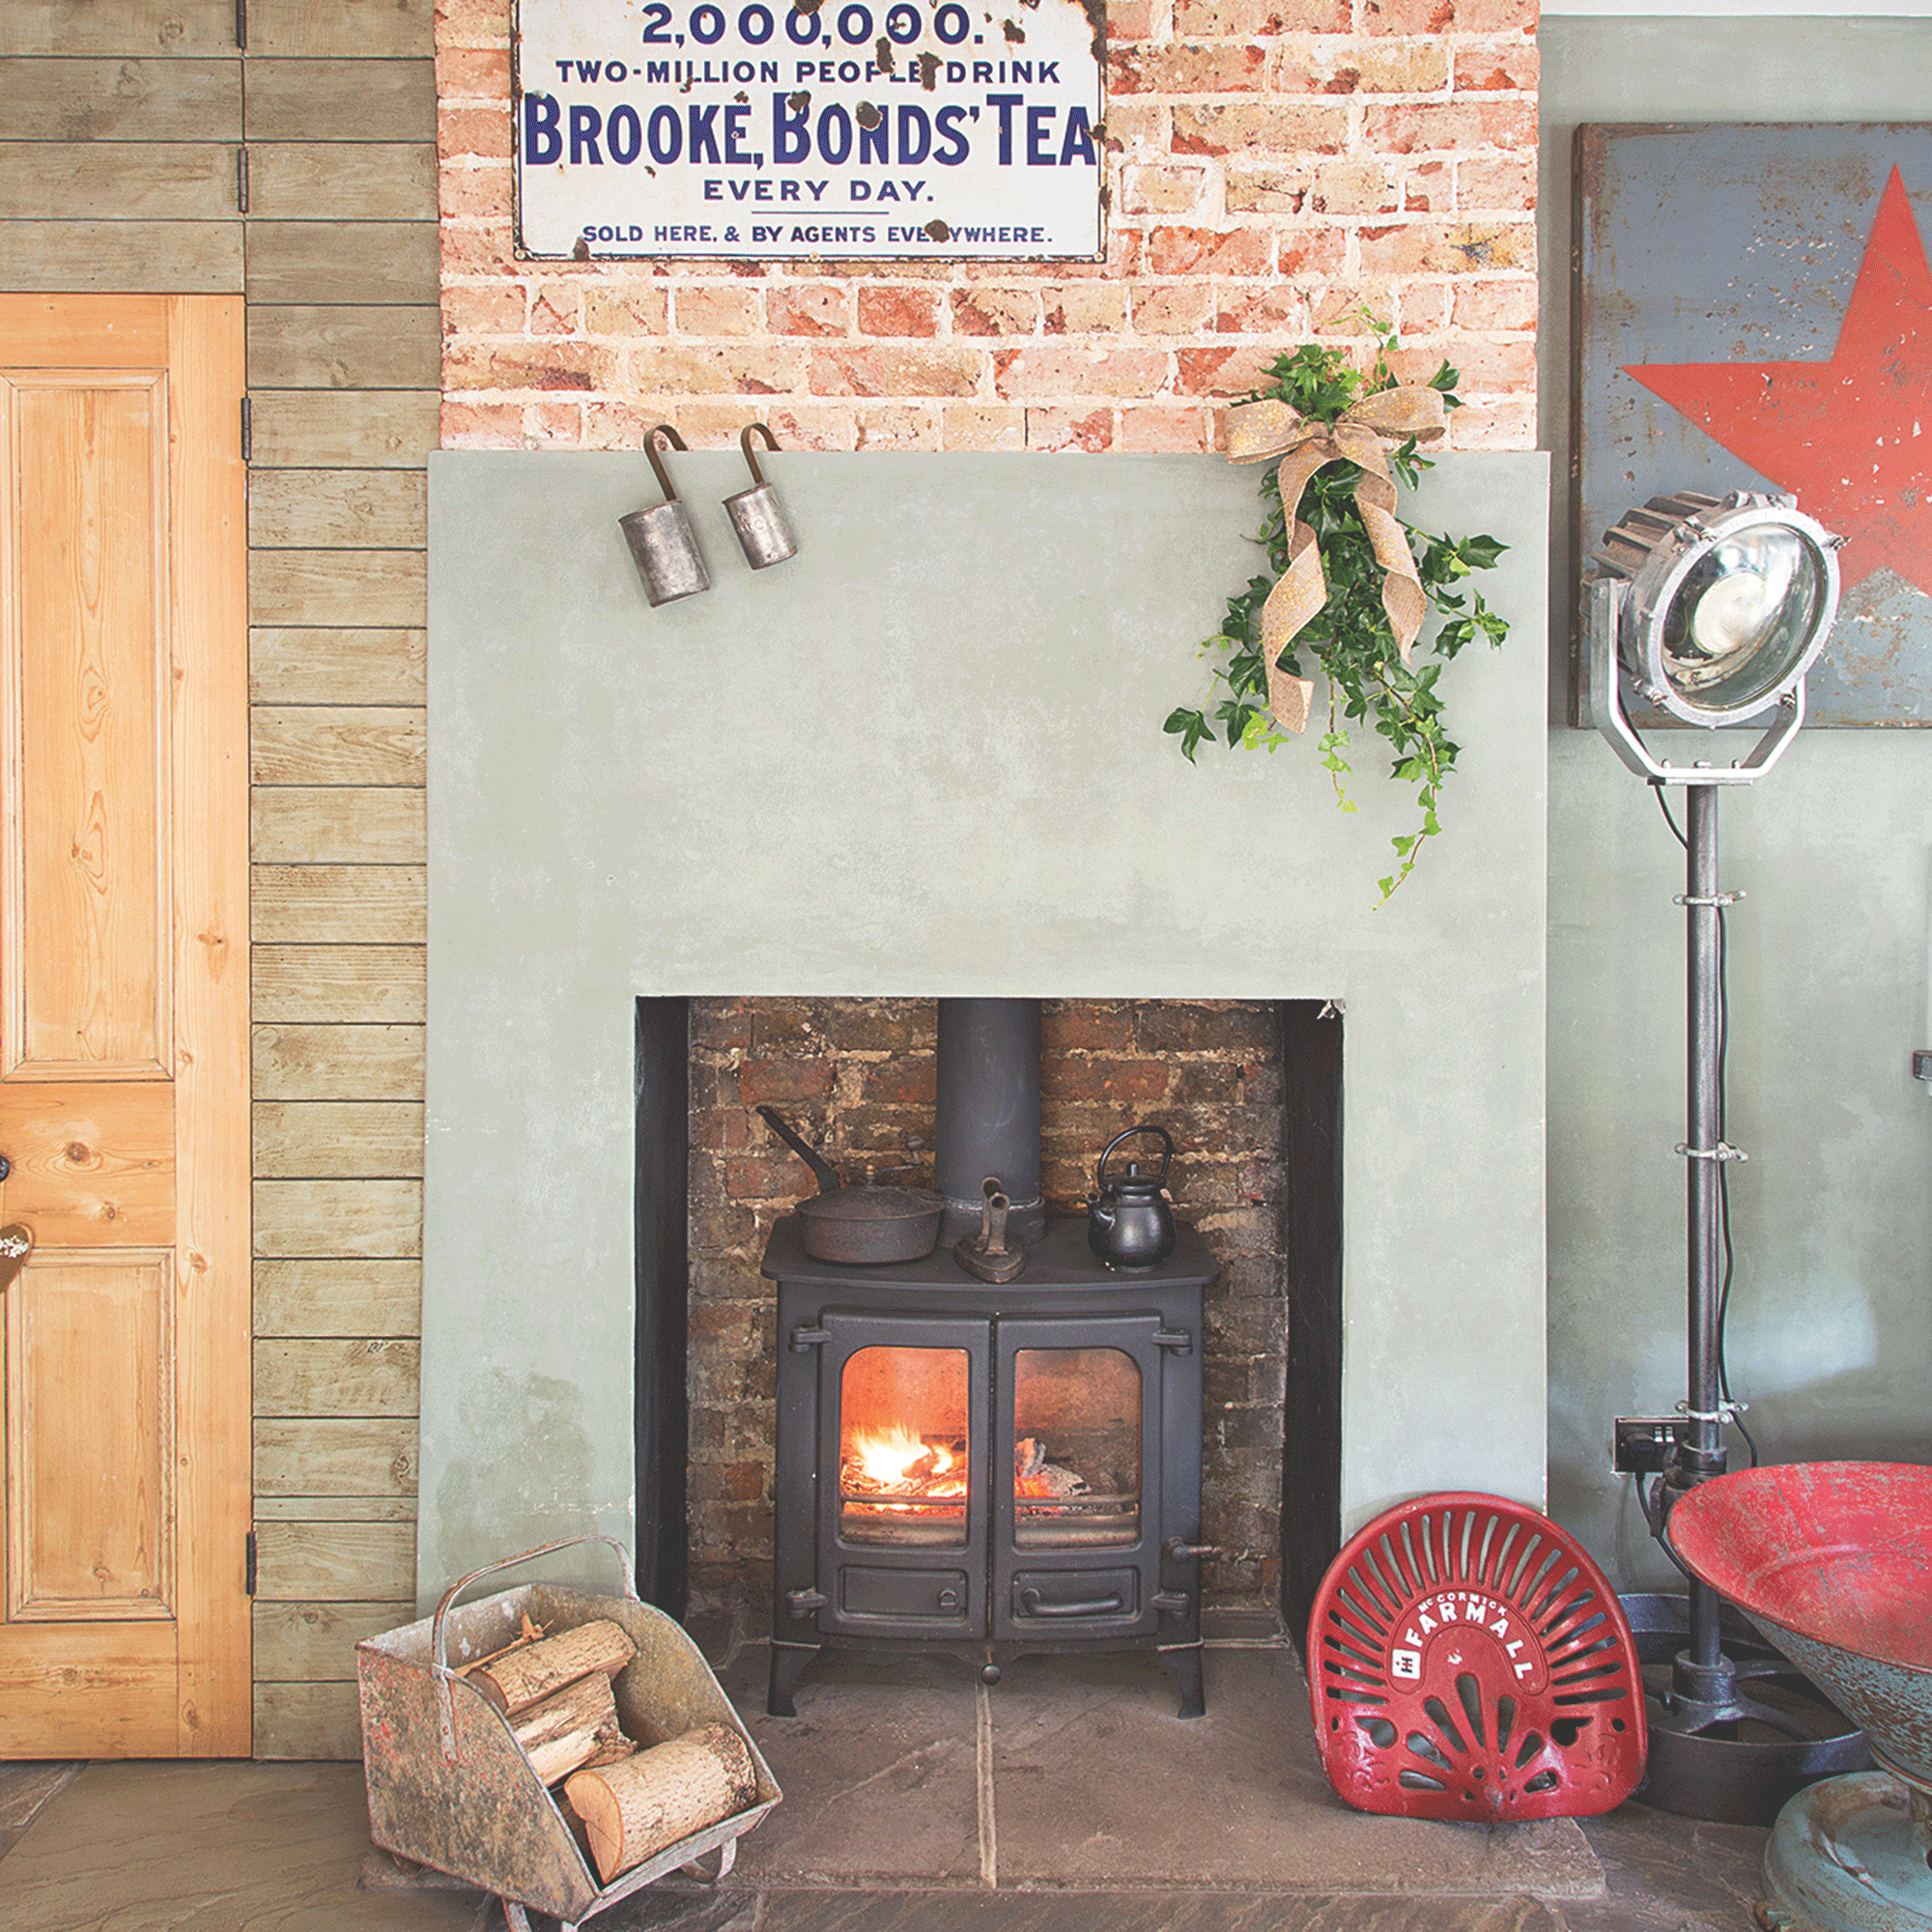 Fireplace with stove and wood storage bucket